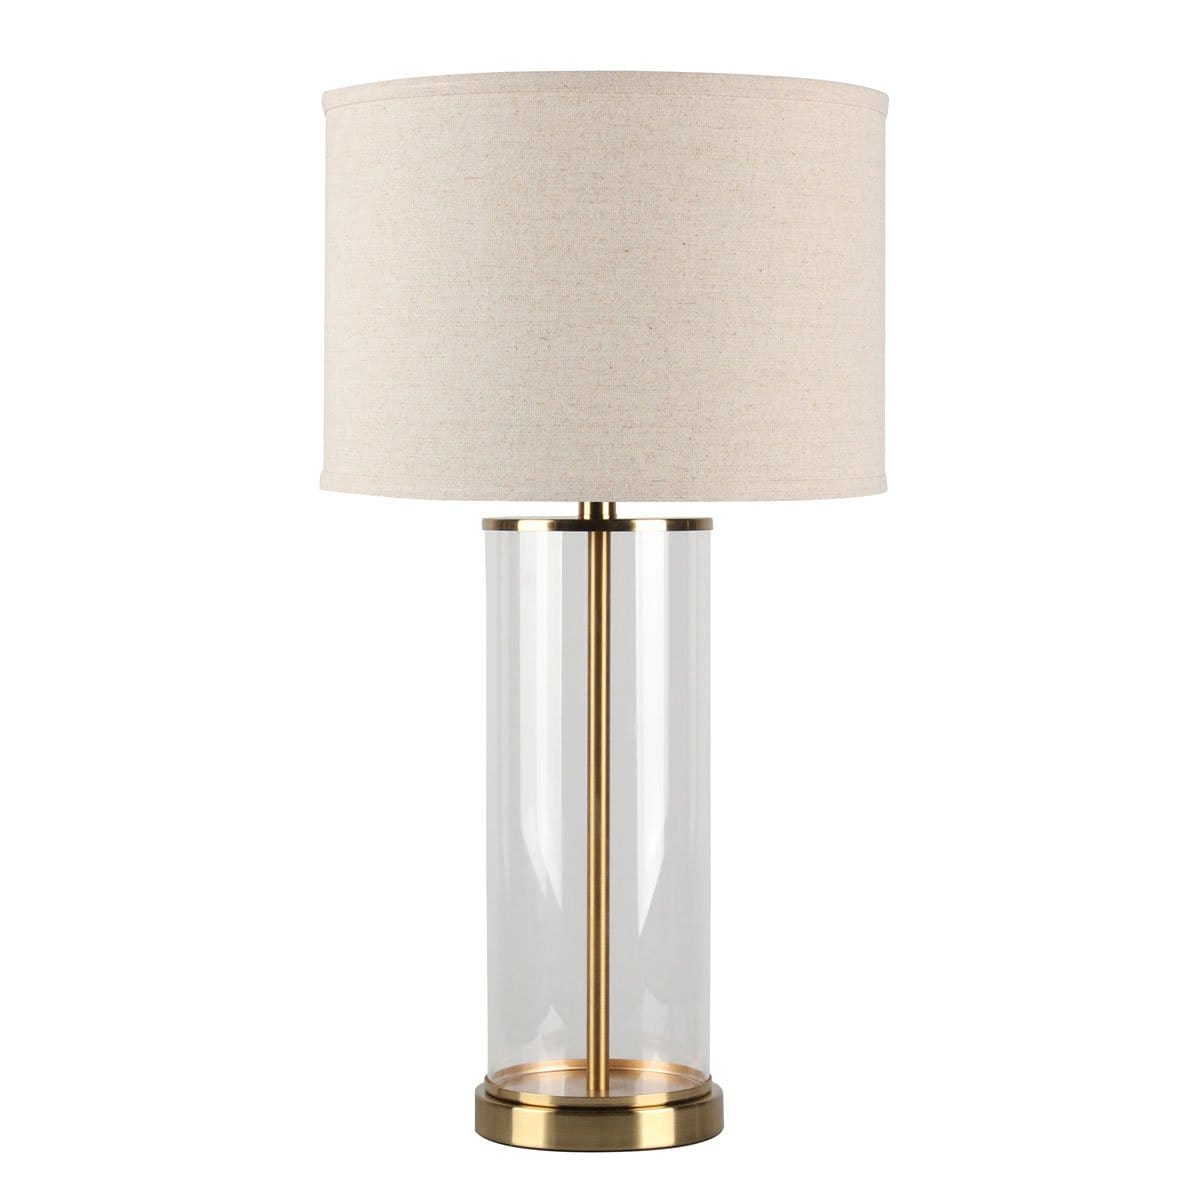 CAFE LIGHTING & LIVING Table Lamp Left Bank Table Lamp - Brass w Natural Shade B12269